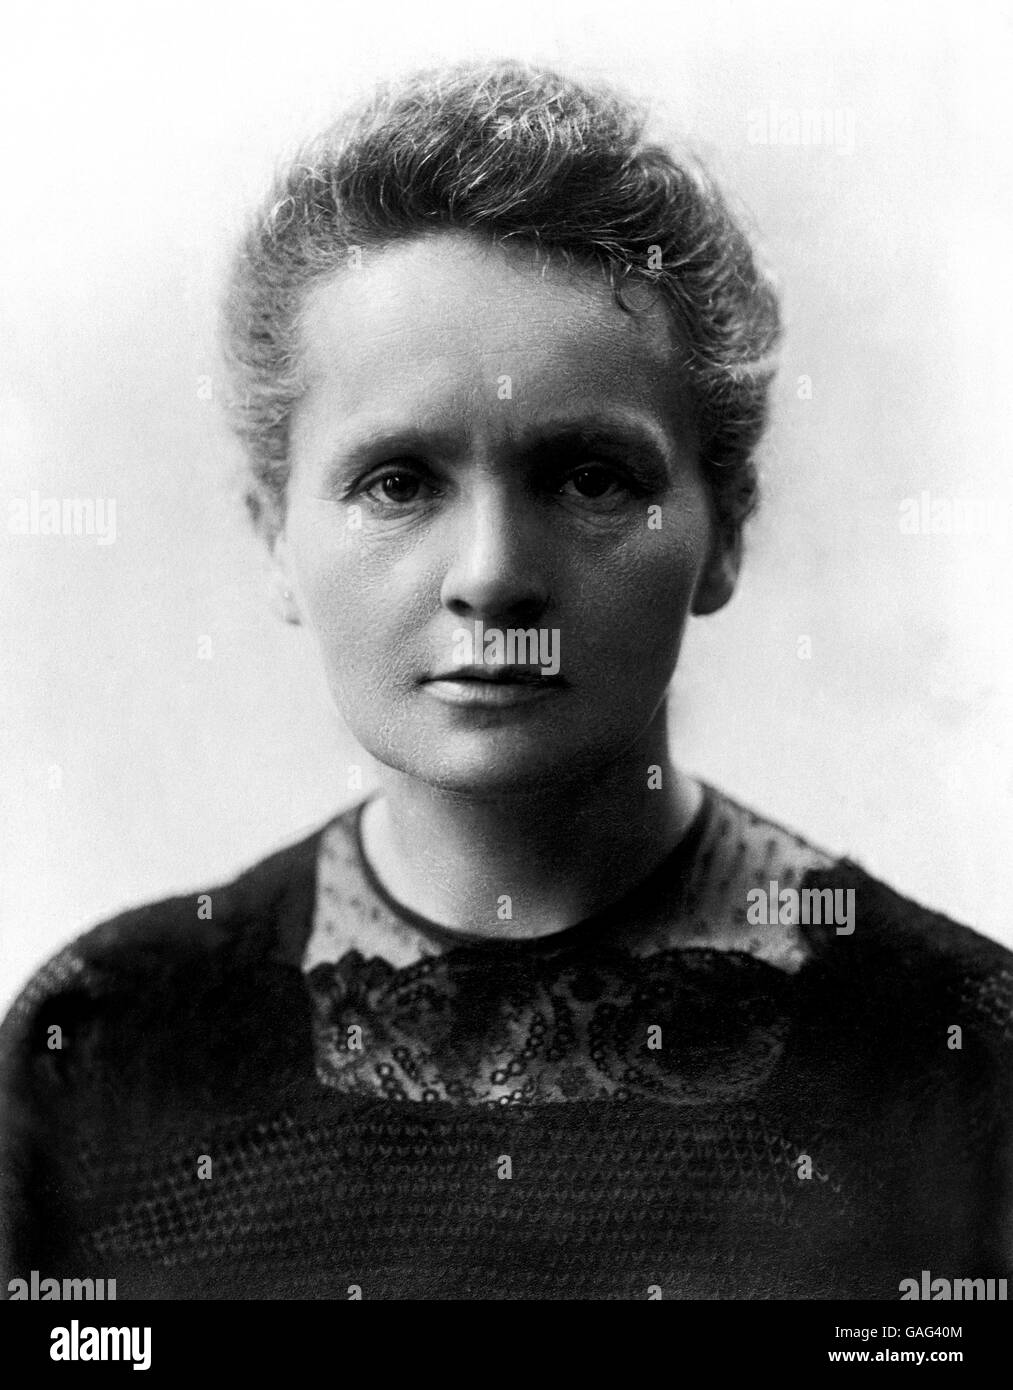 Marie Curie, a physicist and chemist of Polish upbringing and, subsequently, French citizenship. She was a pioneer in the field of radioactivity and the first twice-honored Nobel laureate. Stock Photo